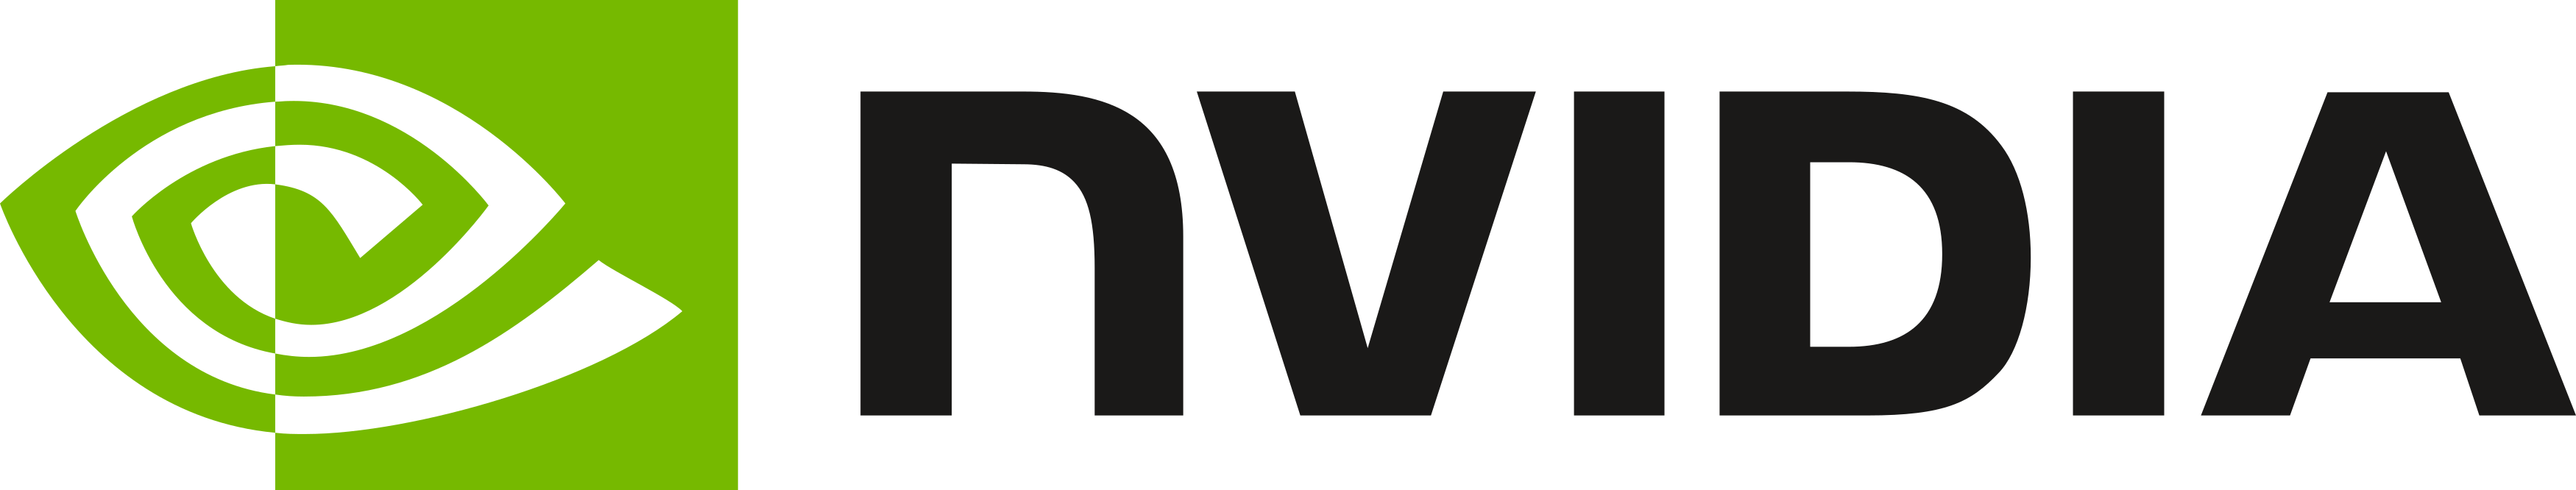 Nvidia Logo In Transparent Png And Vectorized Svg For - vrogue.co